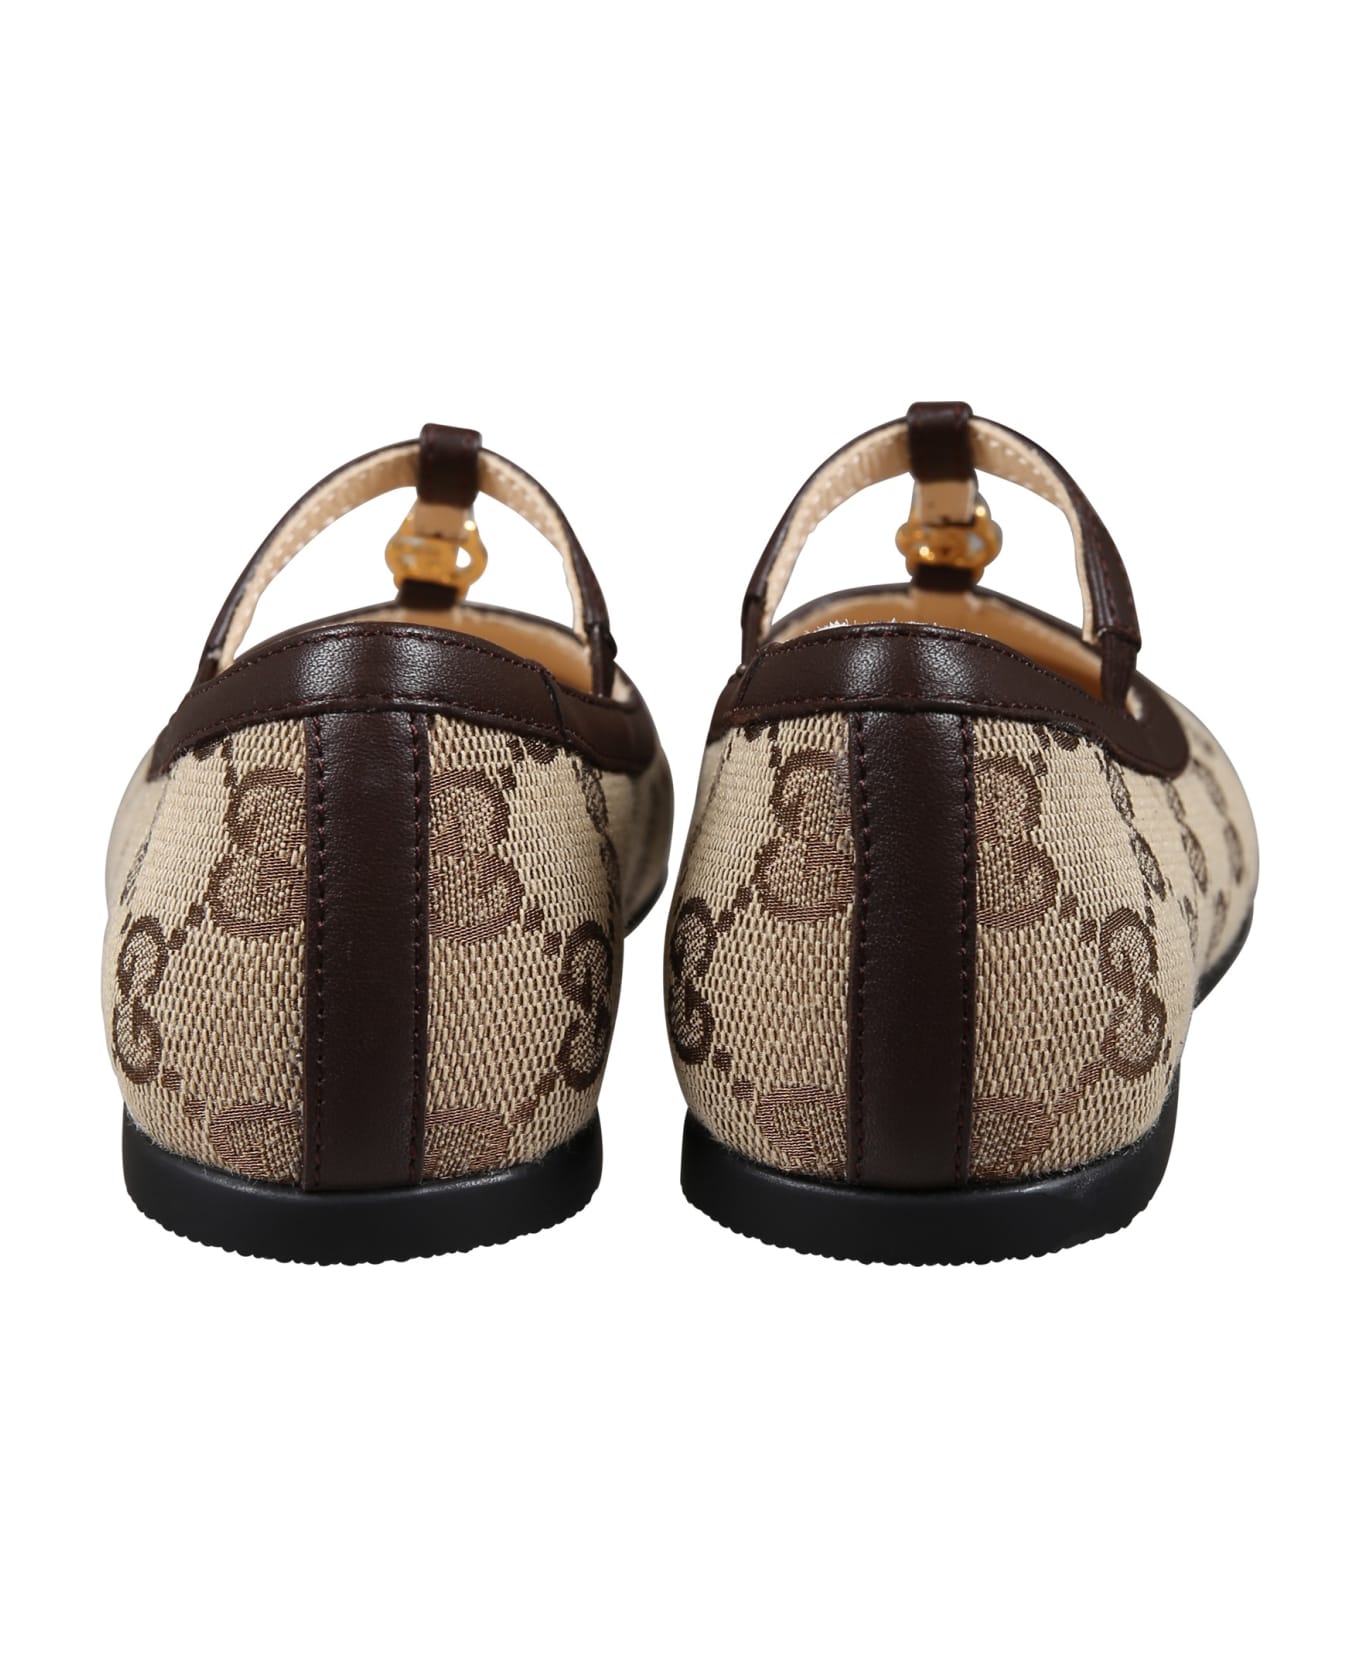 Gucci Brown Ballet Flats For Baby Girl With Double G - Brown シューズ